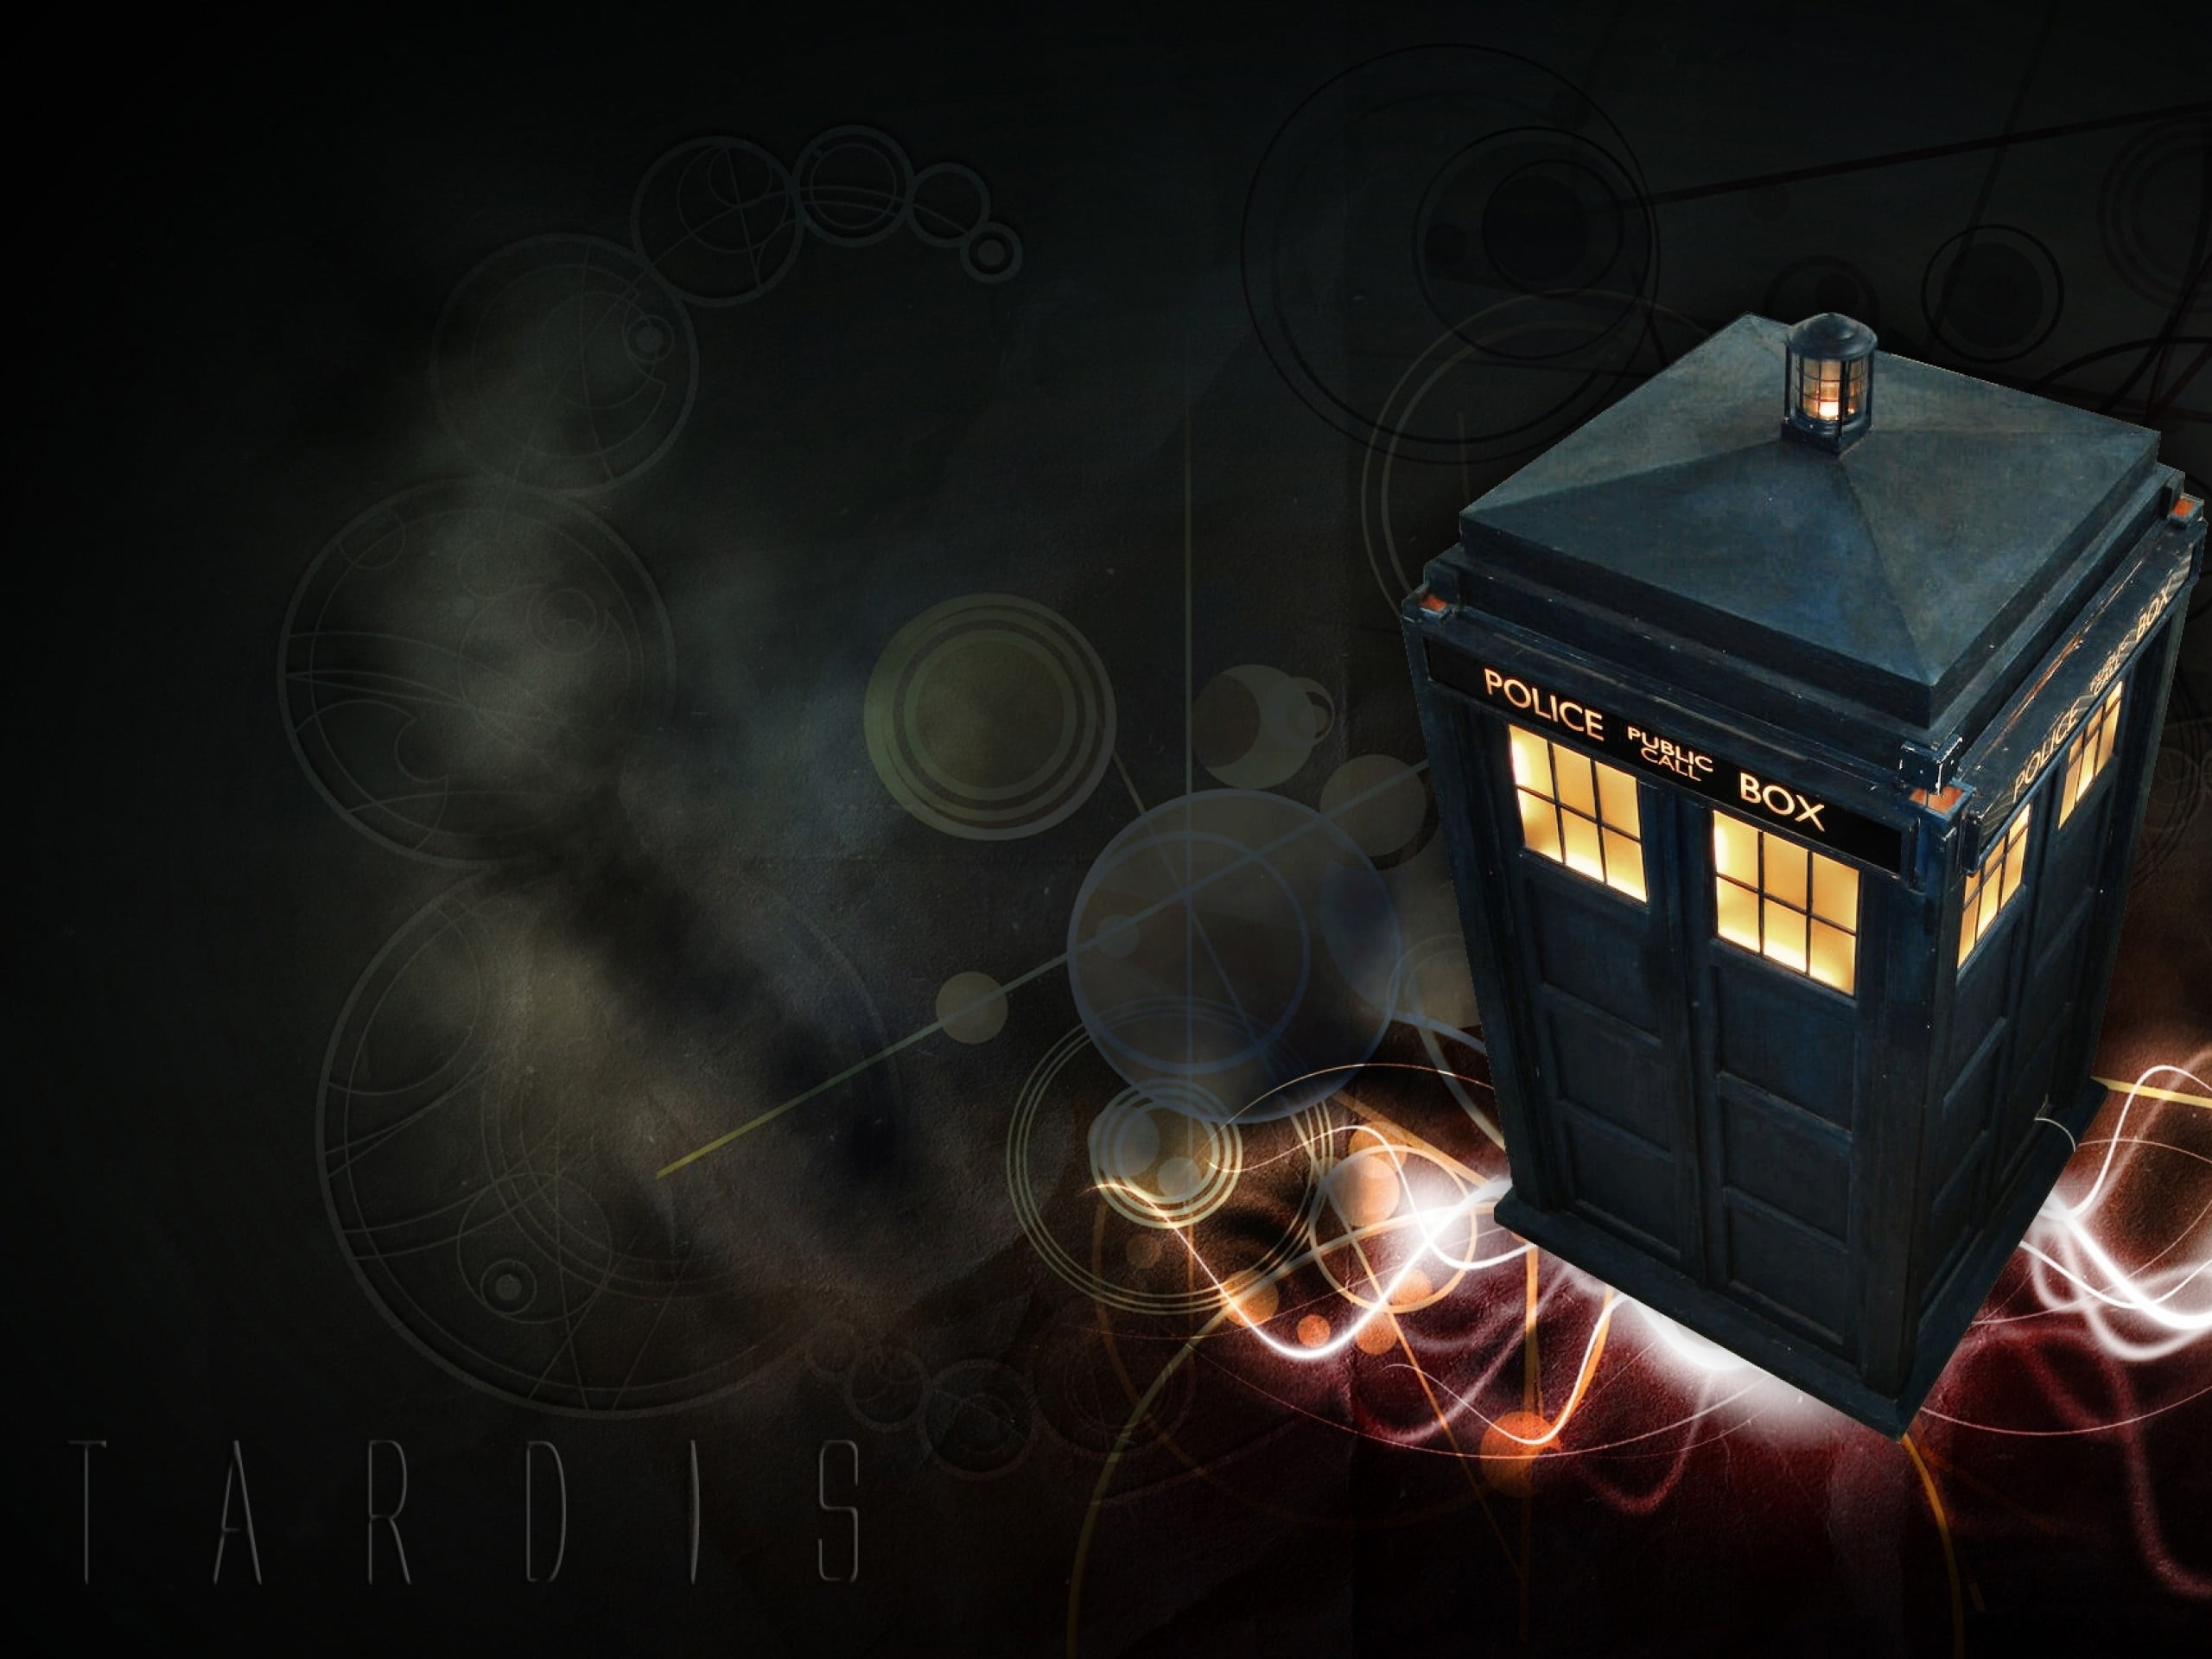 black house-themed lamp, Doctor Who, The Doctor, TARDIS, smoke - physical structure